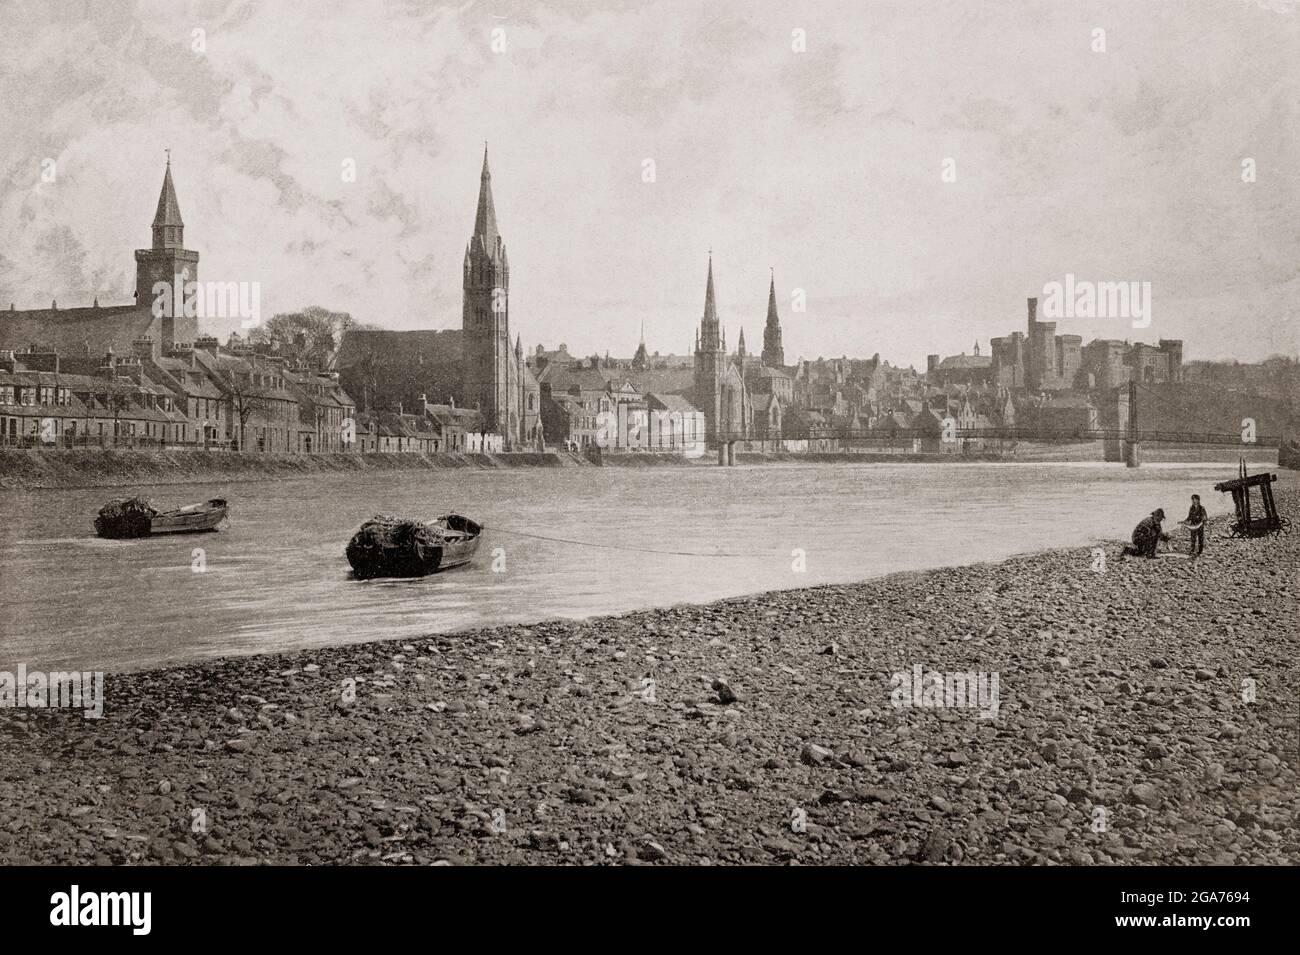 A late 19th century view of Inverness, a city regarded as the capital of the Highlands from the River Ness, historically serving as the county town of the county of Inverness-shire. It is the northernmost city in the United Kingdom and lies within the Great Glen (Gleann Mòr) at its northeastern extremity where the River Ness enters the Beauly Firth. Stock Photo